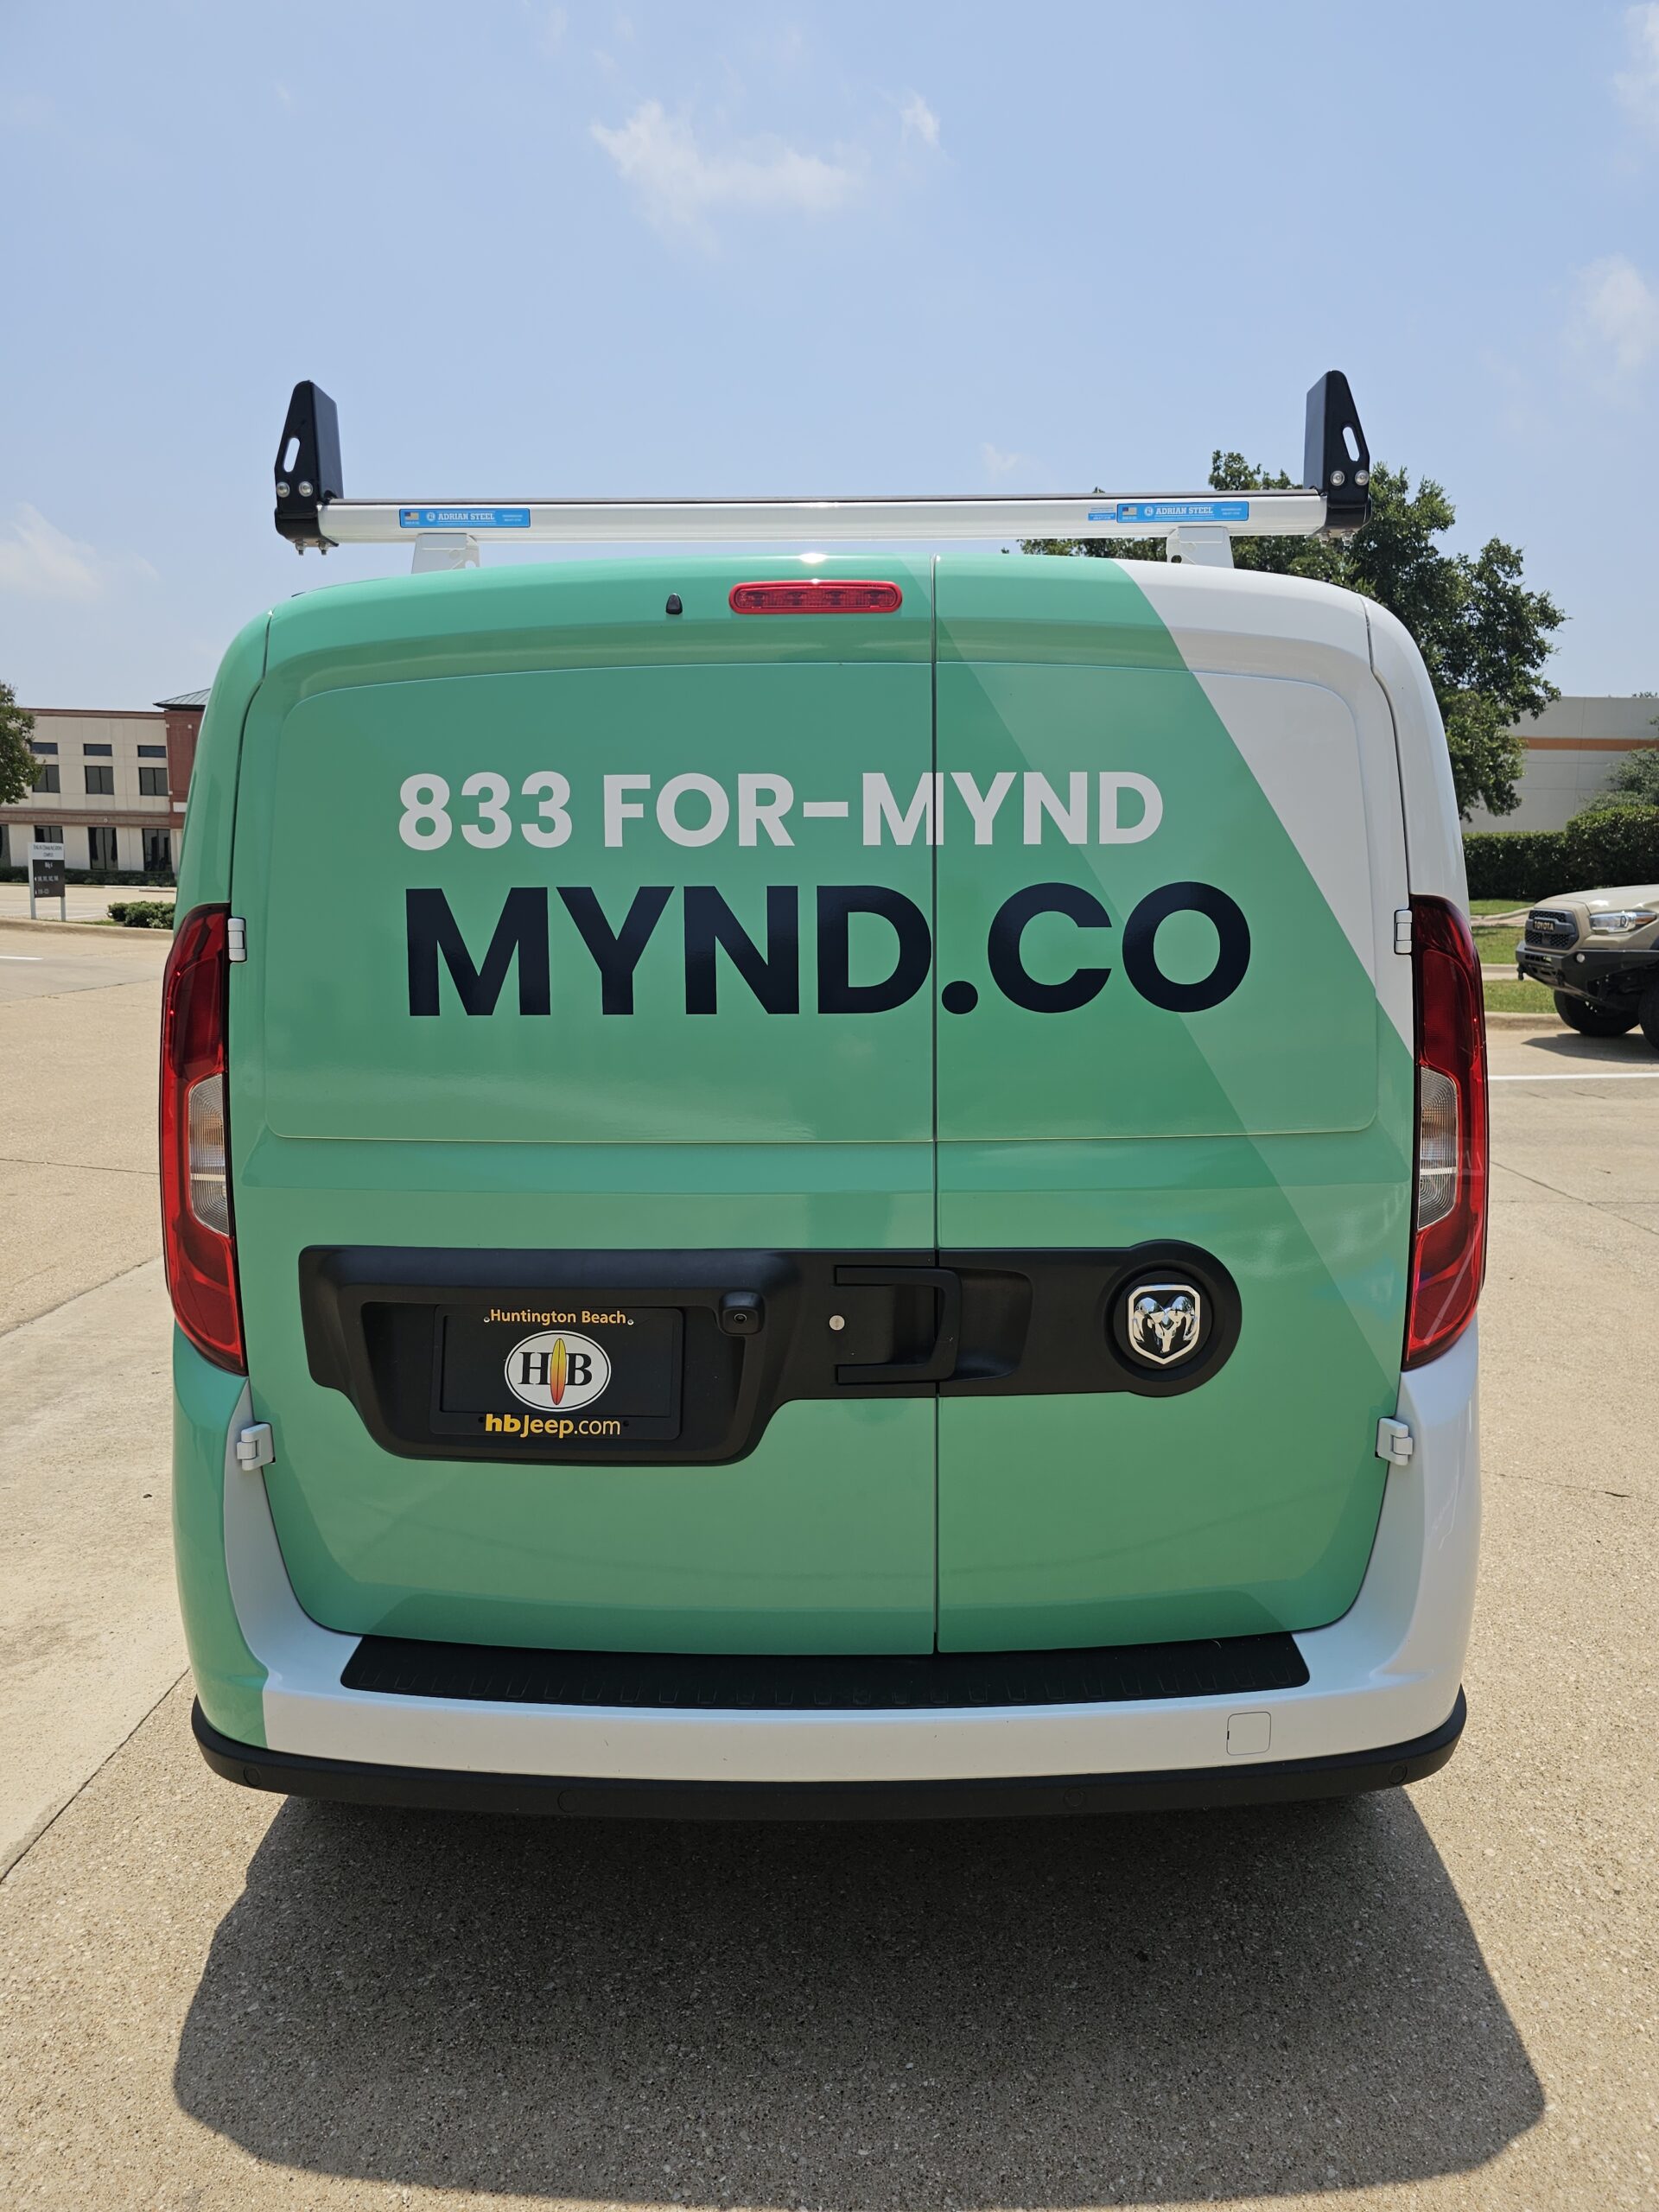 Back of a van that is wrapped in green graphics with promotional text